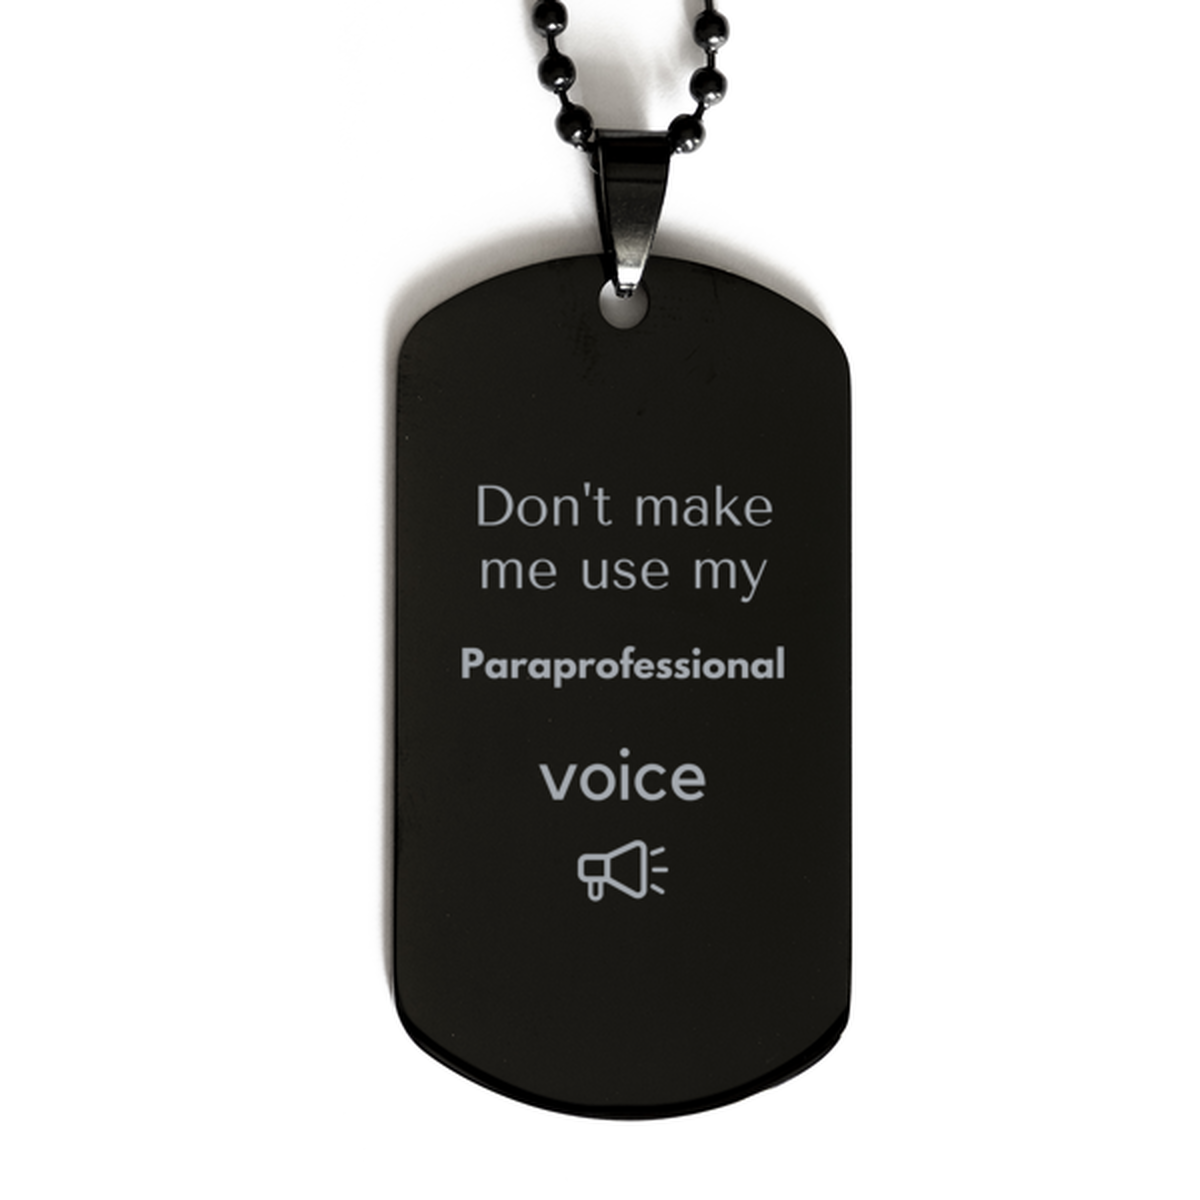 Don't make me use my Paraprofessional voice, Sarcasm Paraprofessional Gifts, Christmas Paraprofessional Black Dog Tag Birthday Unique Gifts For Paraprofessional Coworkers, Men, Women, Colleague, Friends